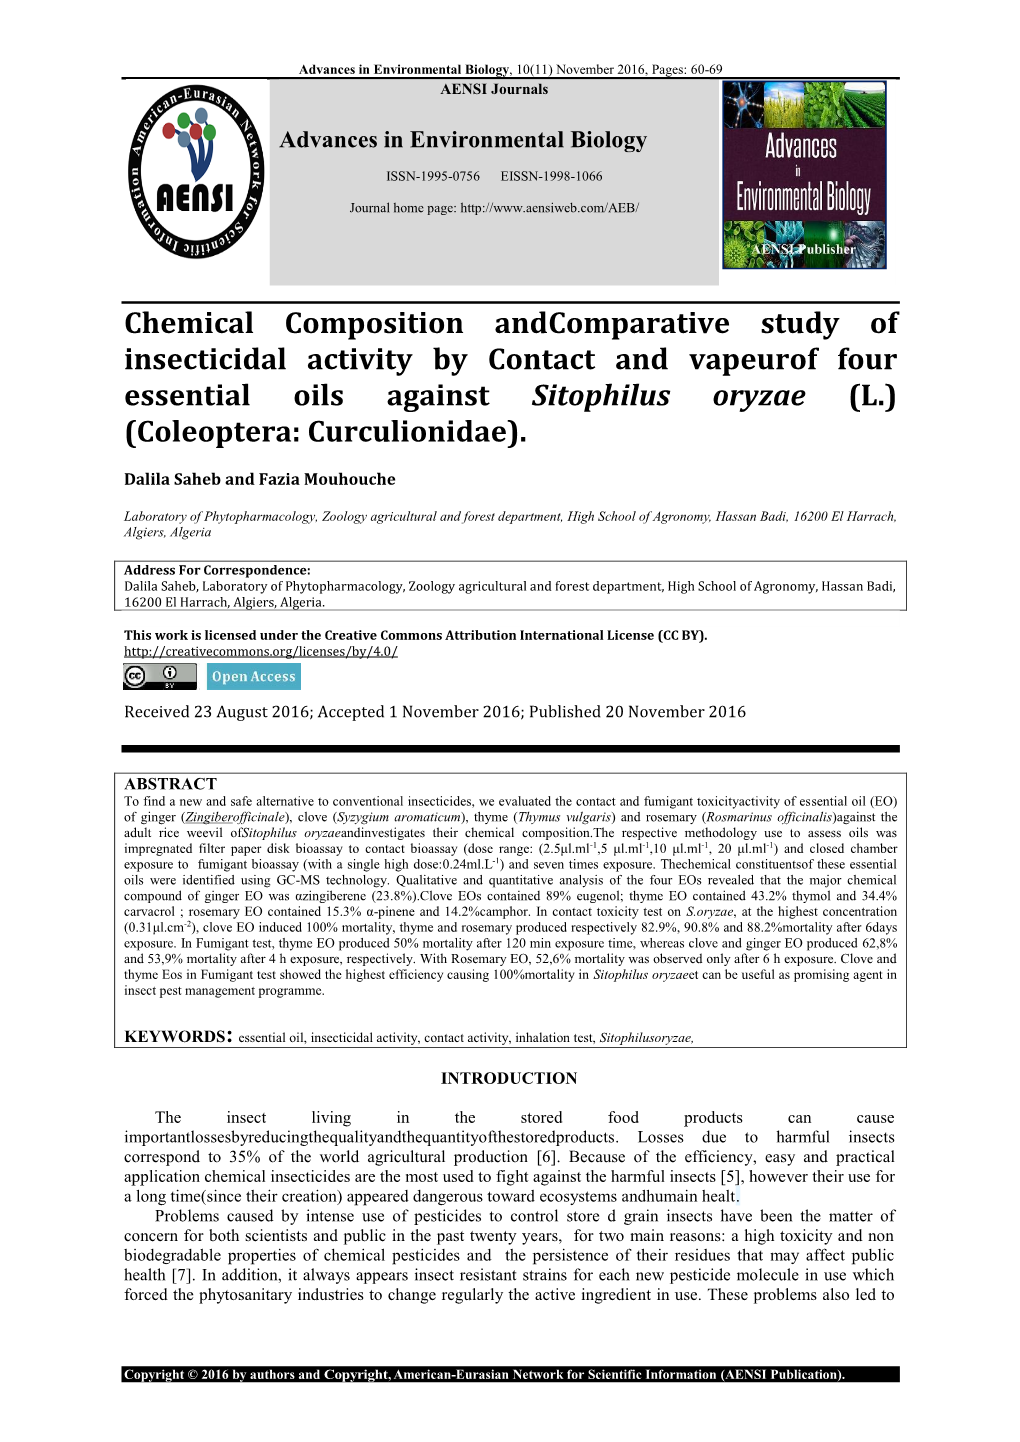 Chemical Composition Andcomparative Study of Insecticidal Activity